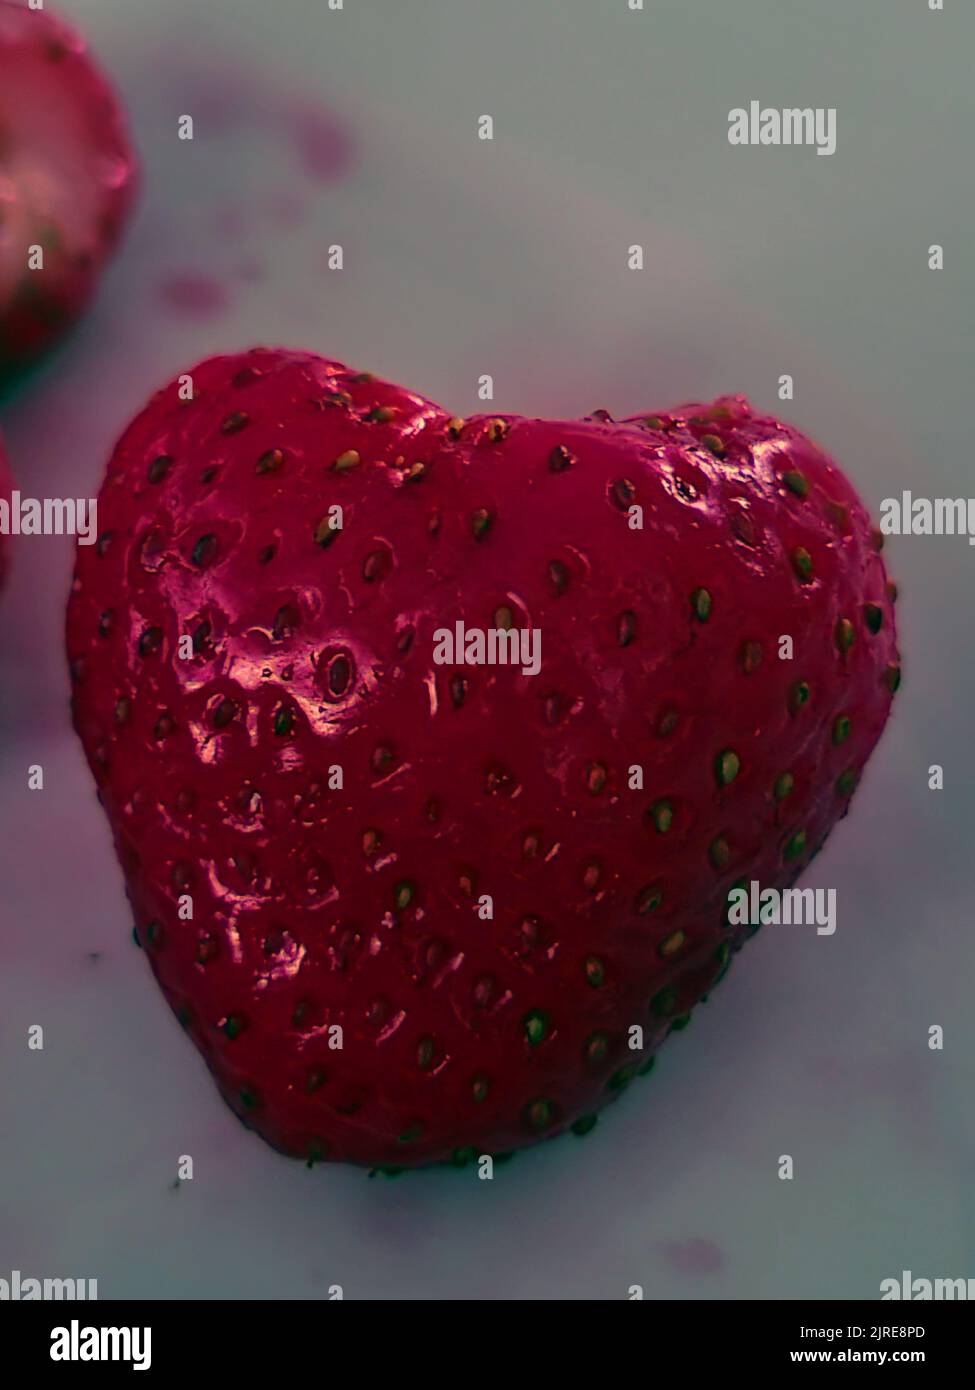 dessert strawberry naturally grown like a heart in abstract metallic optic Stock Photo